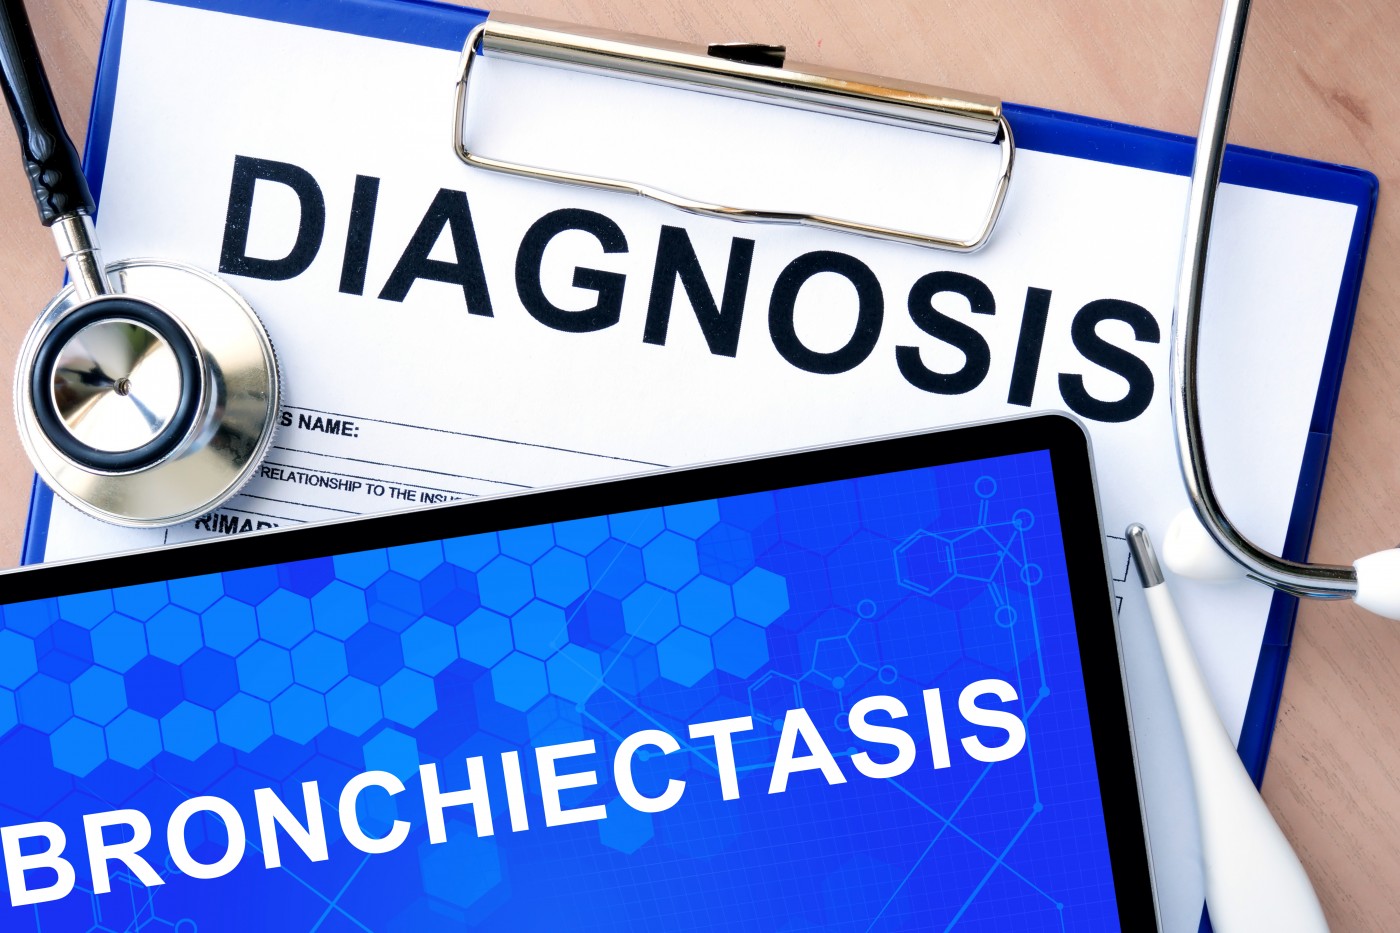 Bronchiectasis in COPD patients